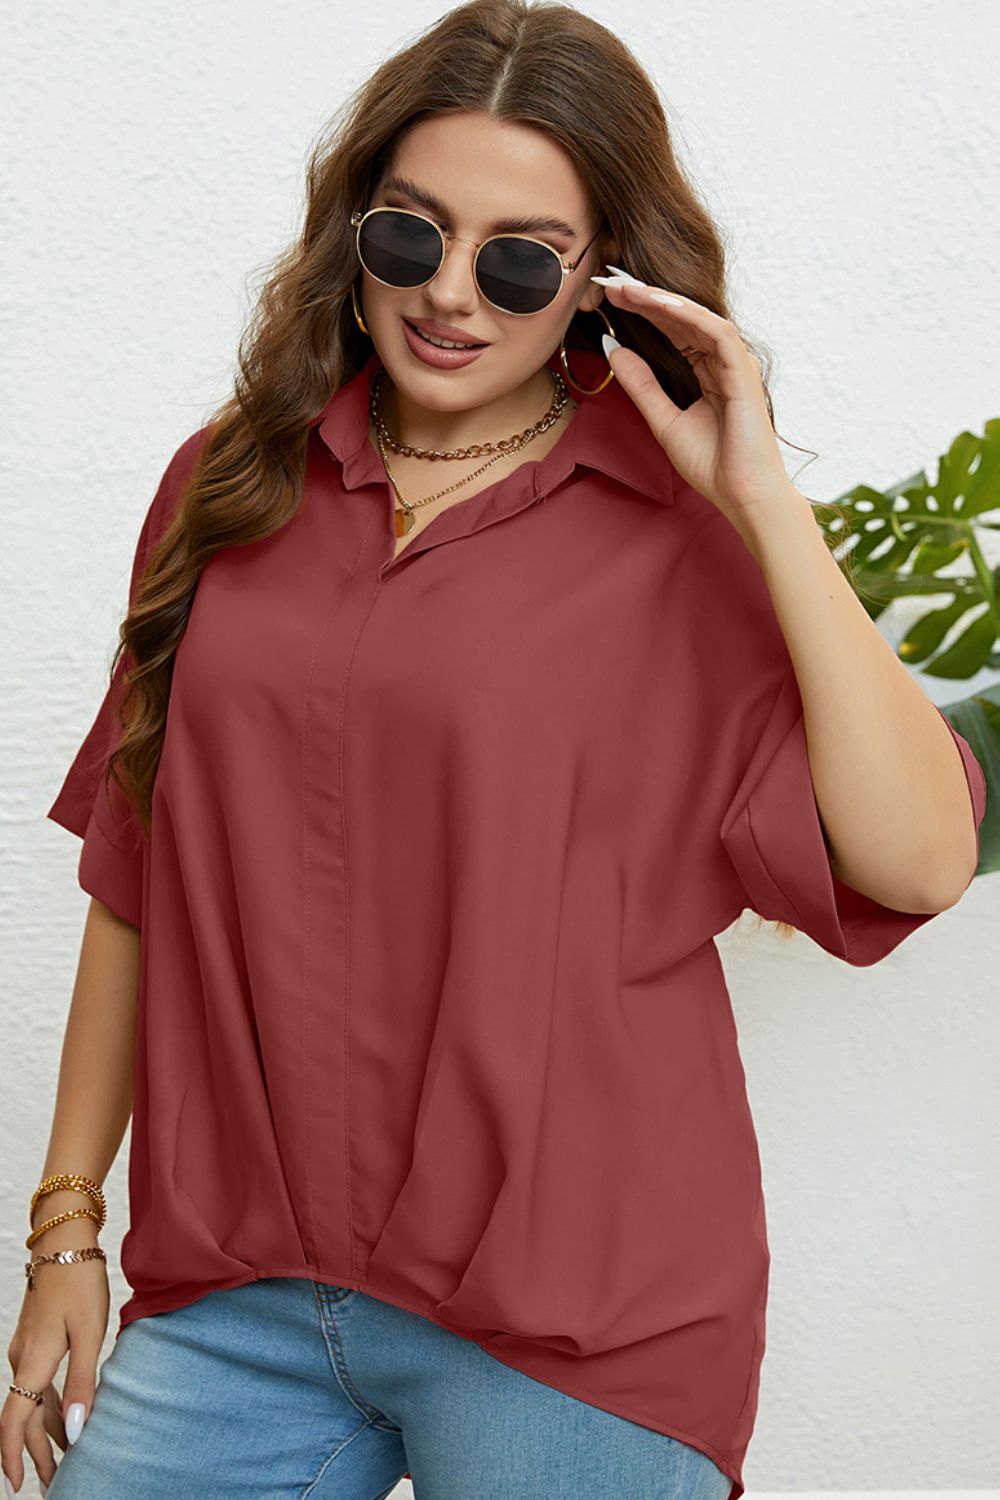 Plus Size Long Resort Blouse, Vacation Top